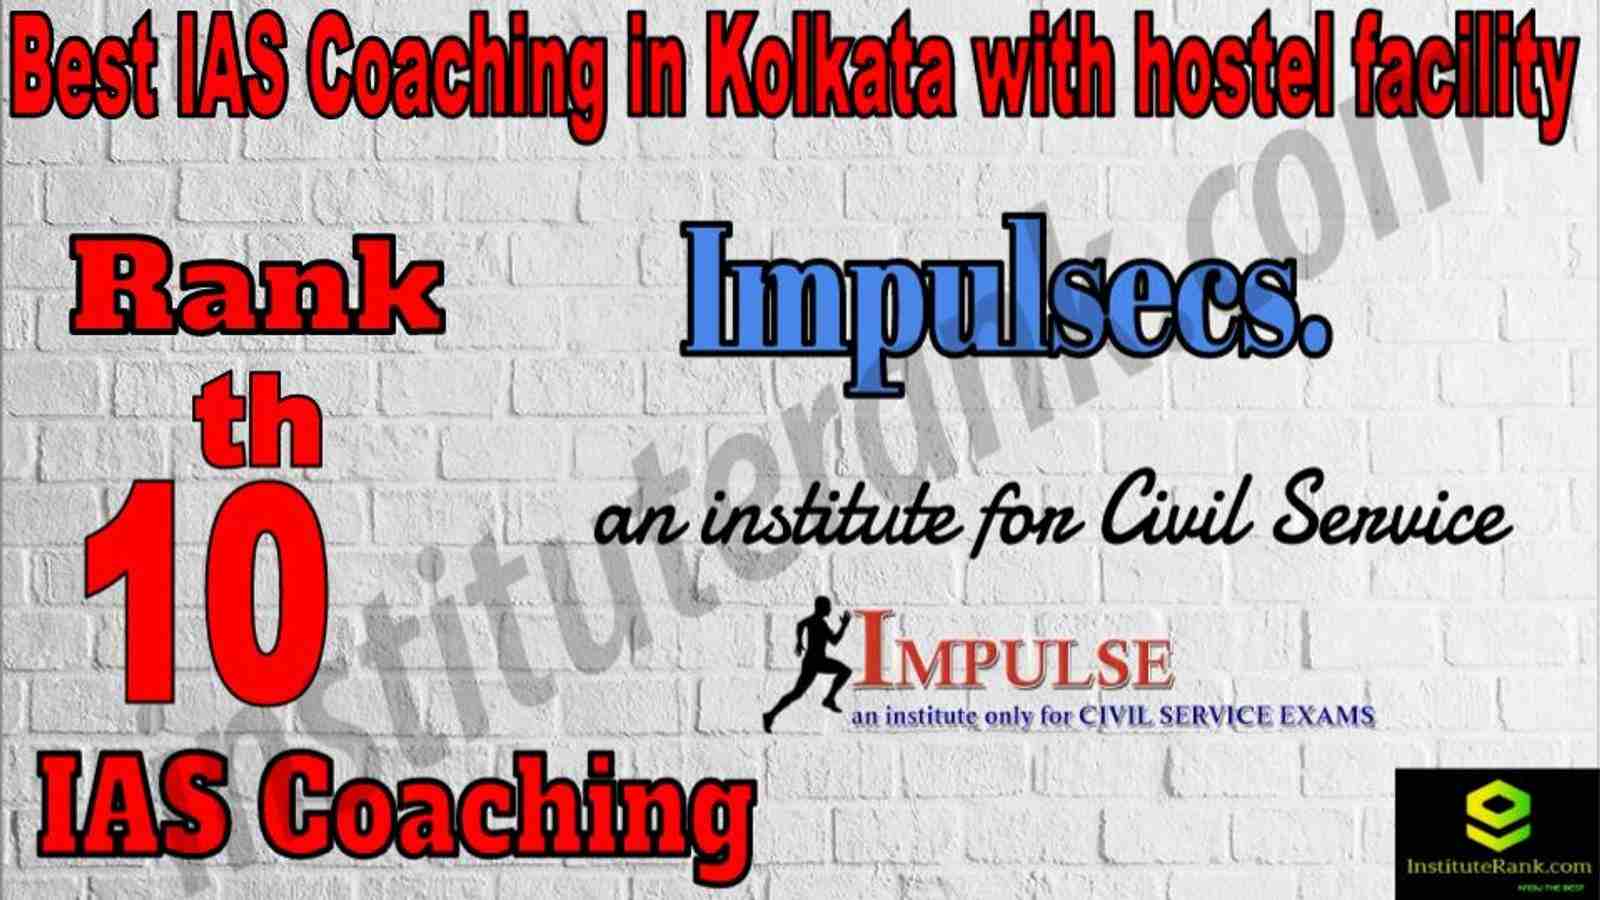 10th Best IAS Coaching in Kolkata with hostel facility